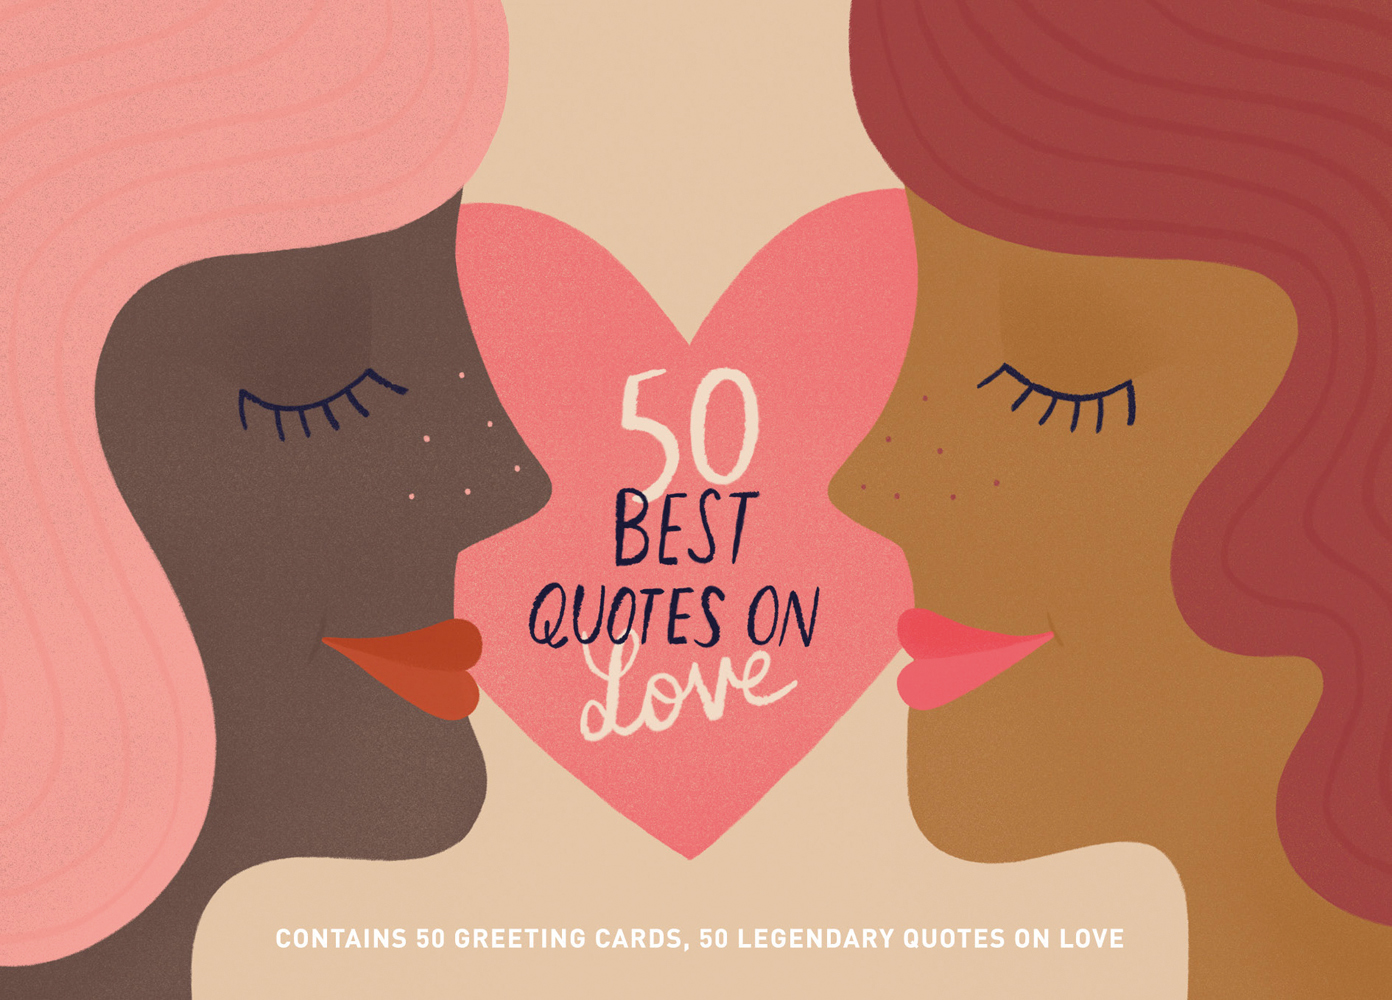 Illustration of 2 female faces with closed eyes, pink love heart behind, 50 BEST QUOTES ON Love in white and blue font to centre.